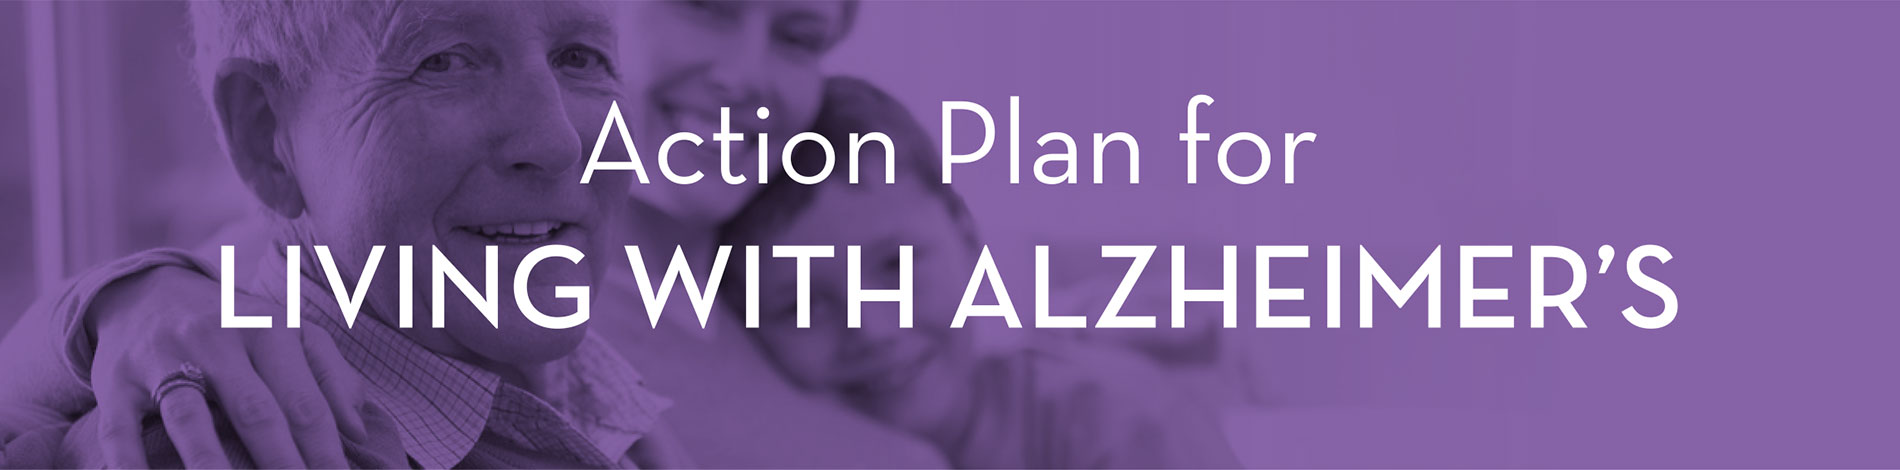 Action Plan for Living With Alzheimer's